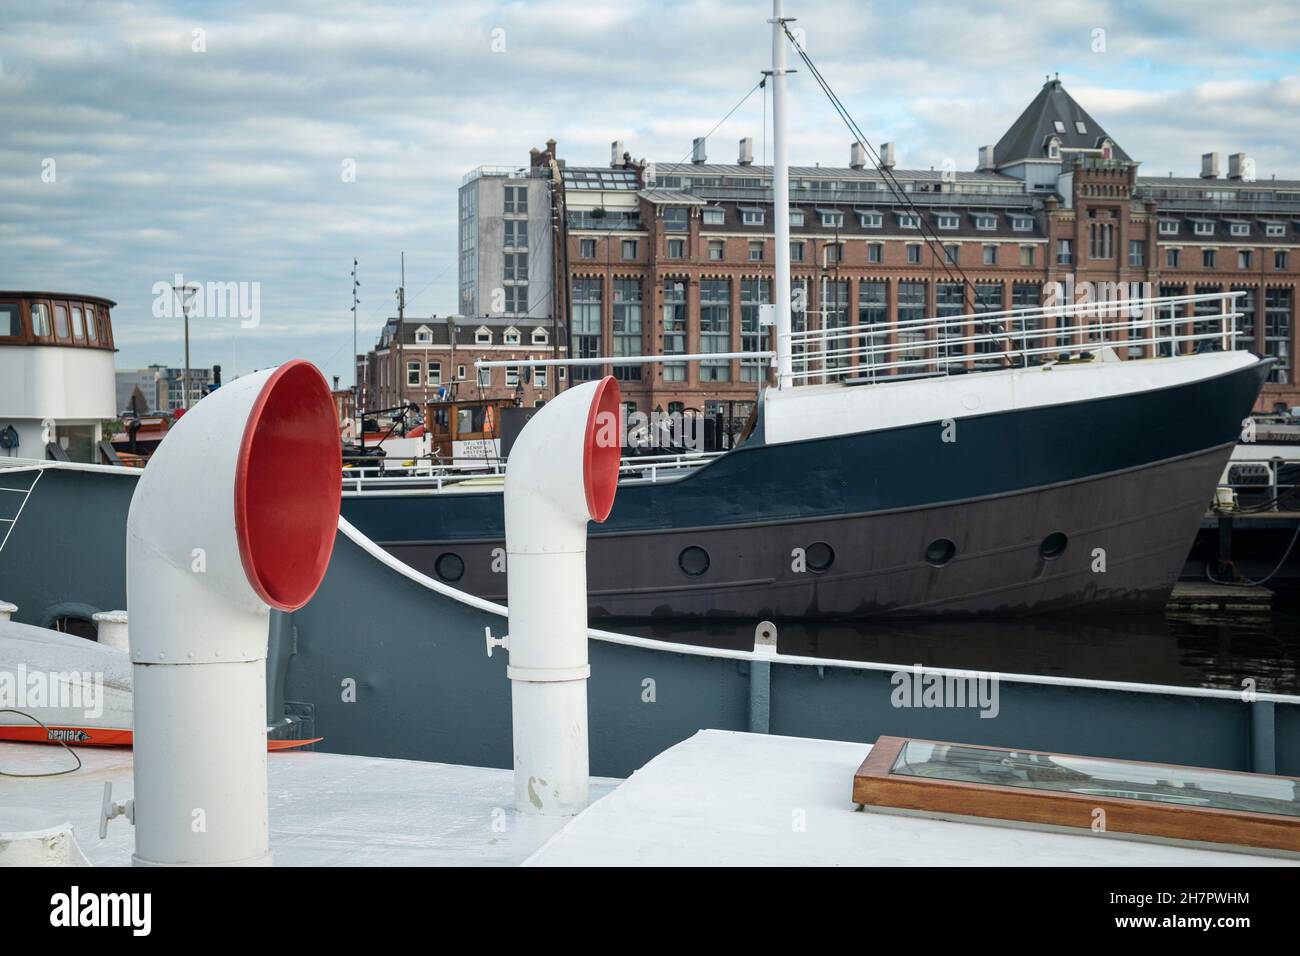 Ventilation intakes on the roof of a houseboat with The Silodam building in the background, Western Harbour, Amsterdam Stock Photo